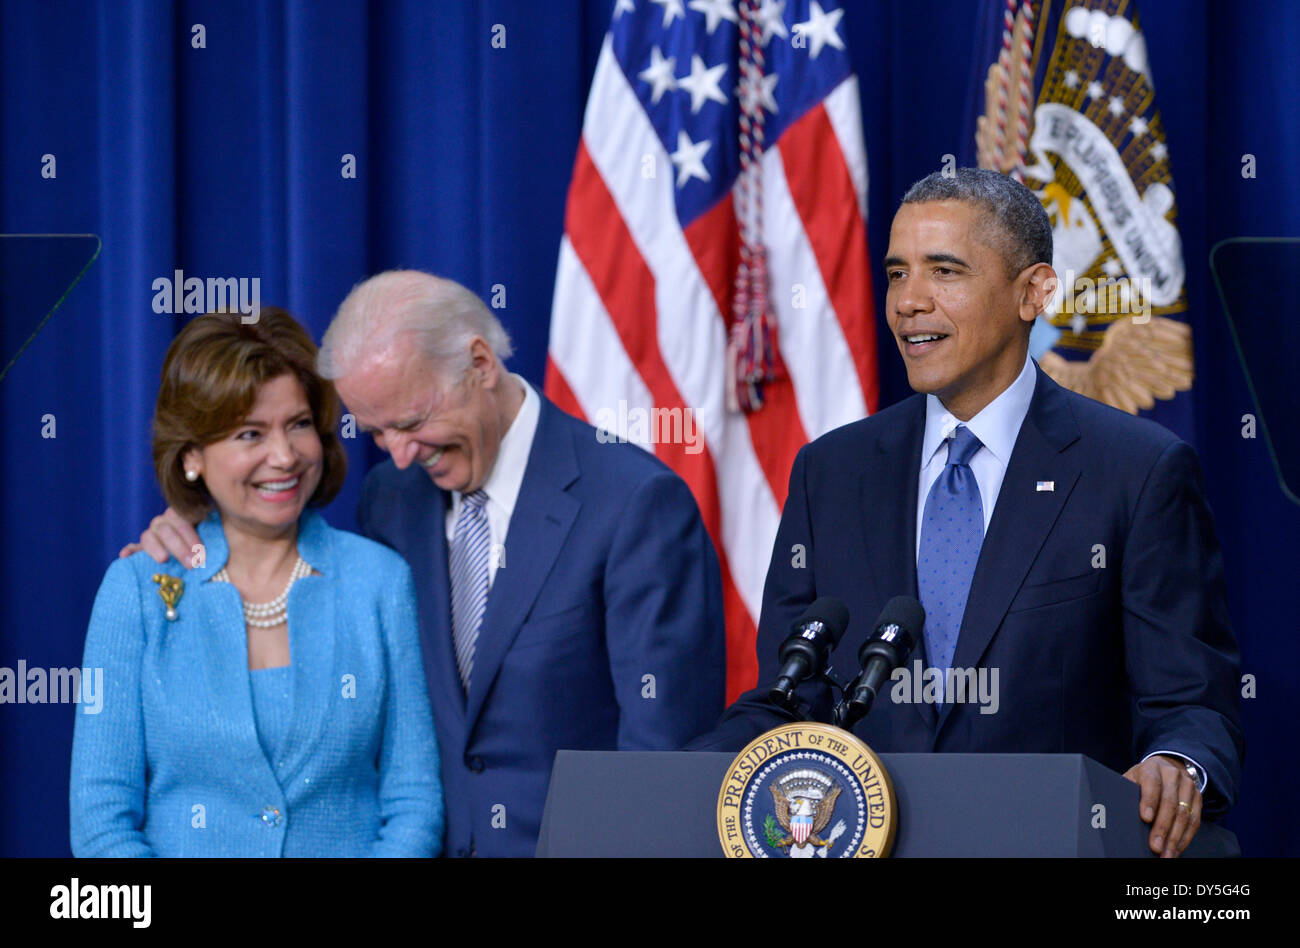 Washington, DC, USA. 7th Apr, 2014. U.S. President Barack Obama (R) and Vice President Joe Biden (C) attend a swearing-in ceremony of Maria Contreras-Sweet (L) as the new administrator of the Small Business Administration (SBA) in the South Court Auditorium of the Eisenhower Executive Office Building, next to the White House in Washington, DC, April 7, 2014. Born in Mexico, Contreras-Sweet immigrated to the United States when she was a child. During her career, she has a mix of corporate and government experience to support small businesses. Credit:  Yin Bogu/Xinhua/Alamy Live News Stock Photo